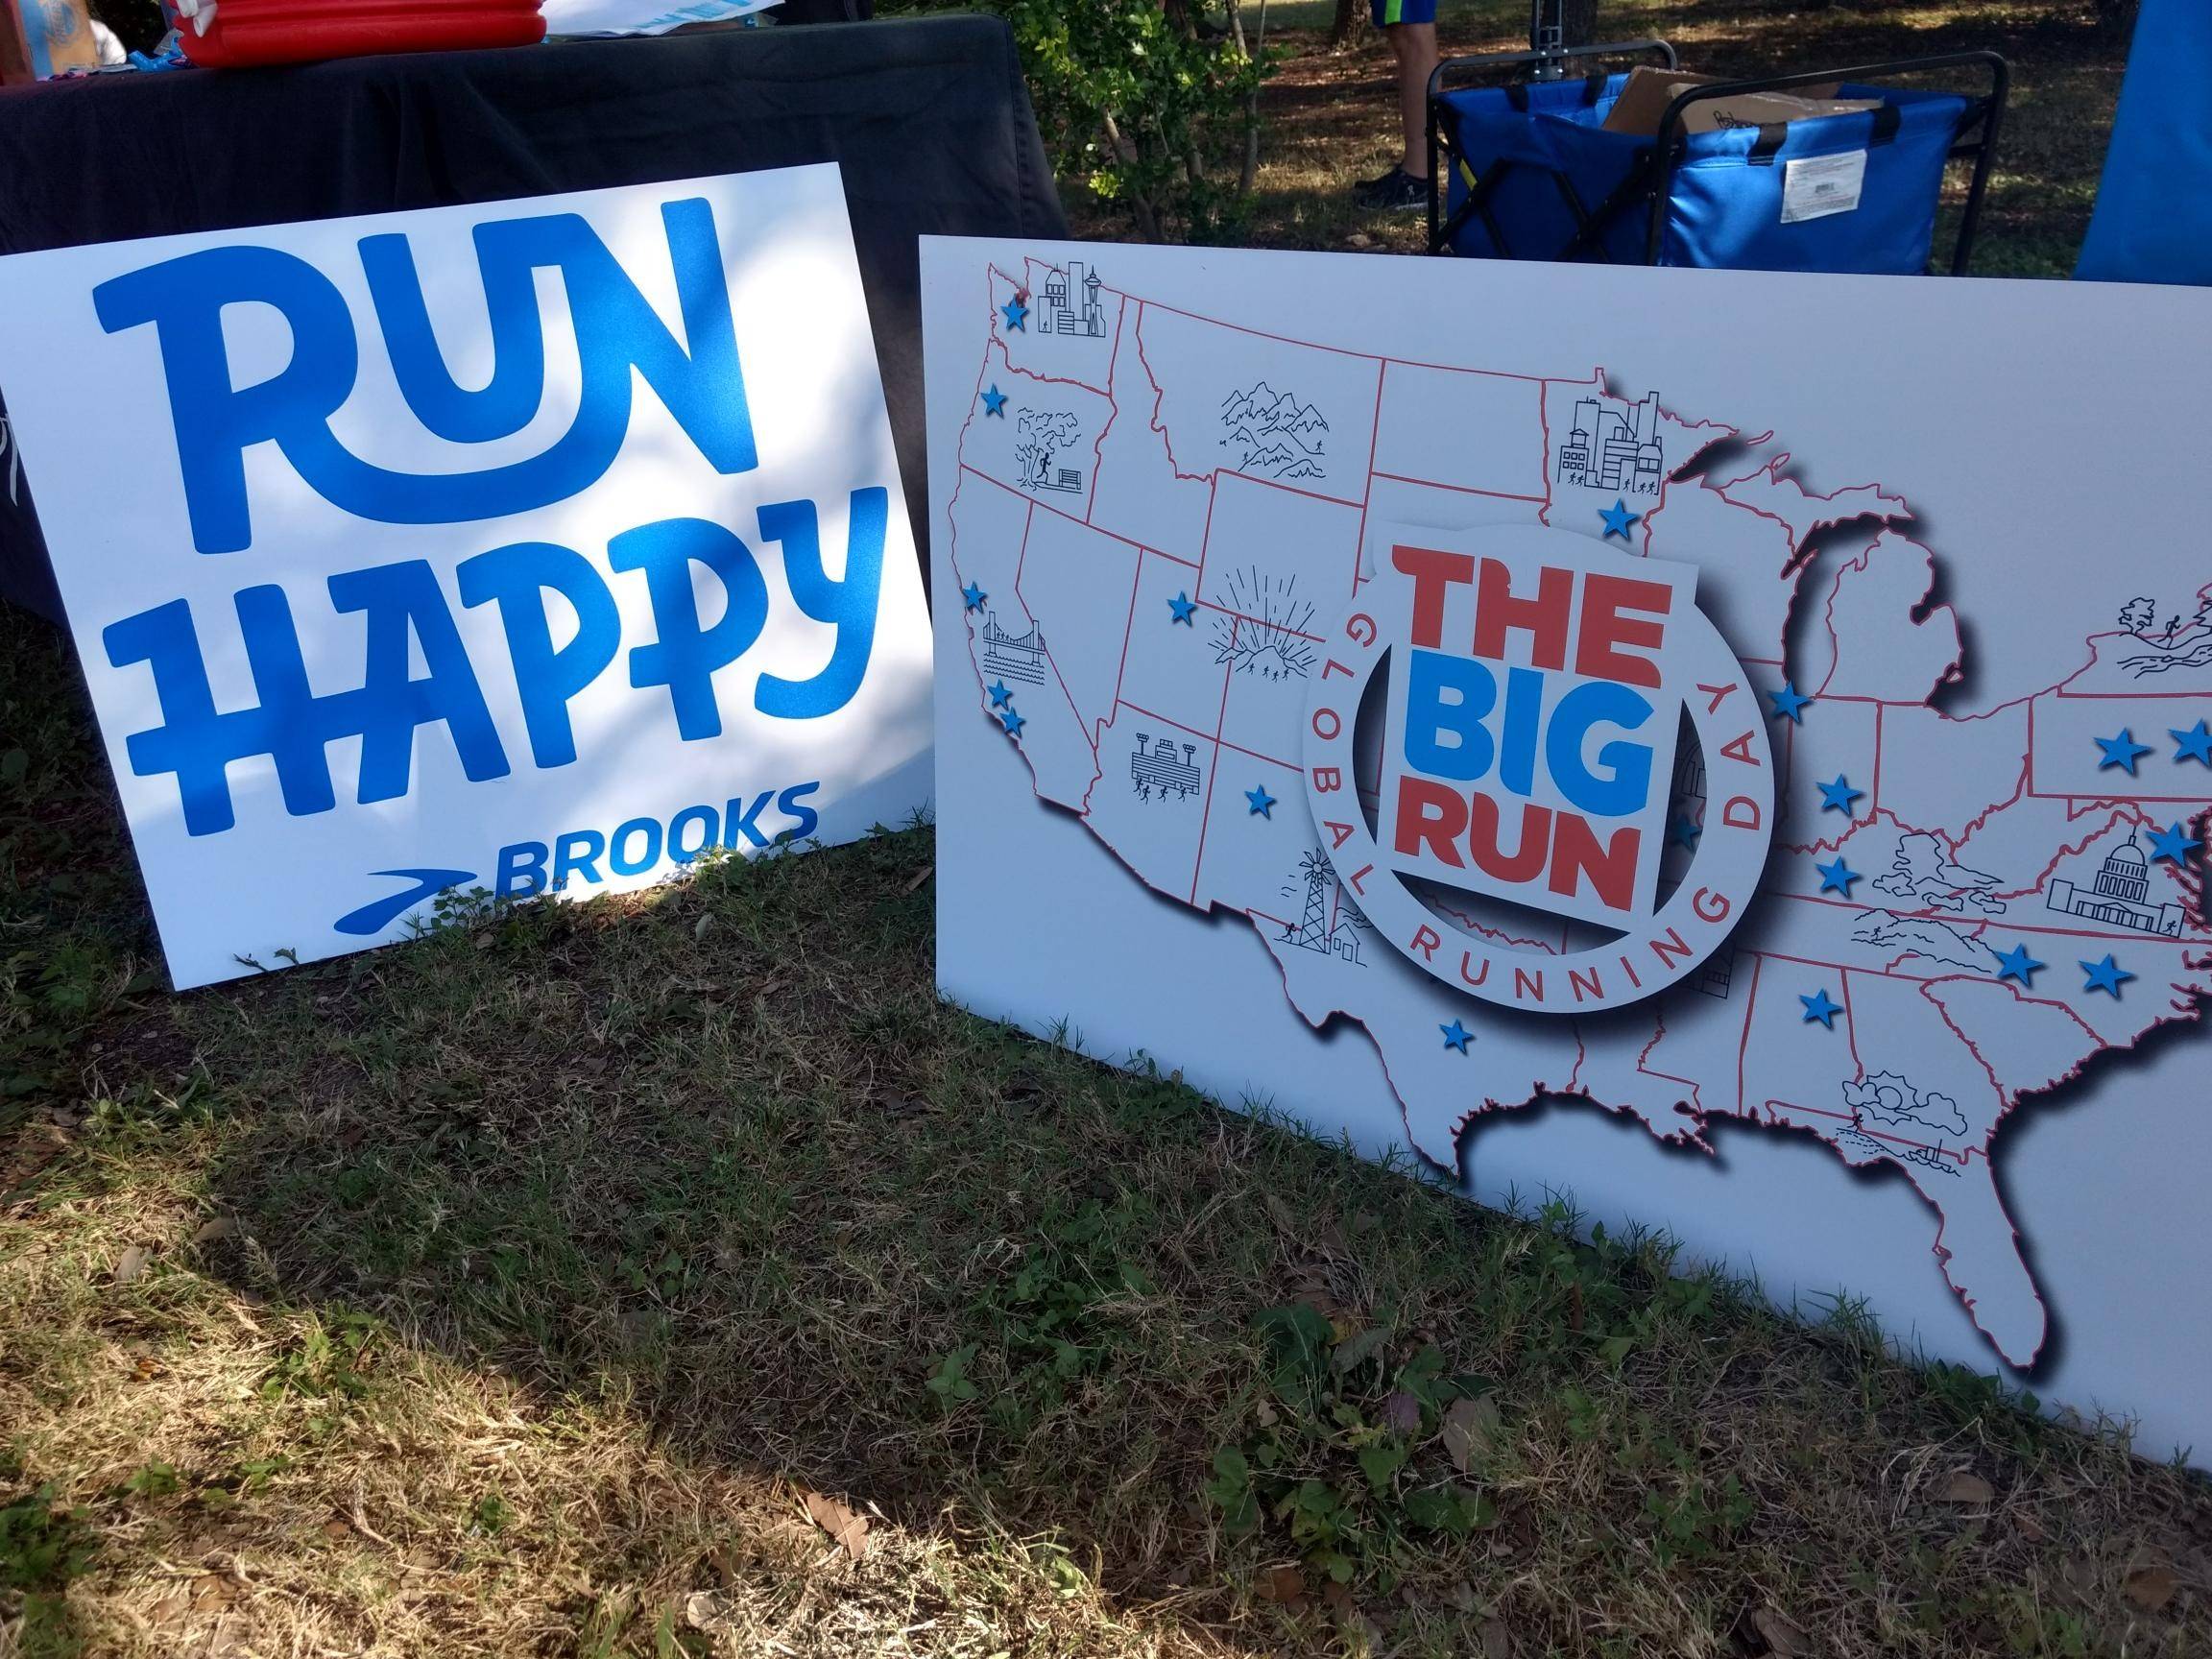 Two signs: "Run Happy" and a map of the United States with "The Big Run" logo